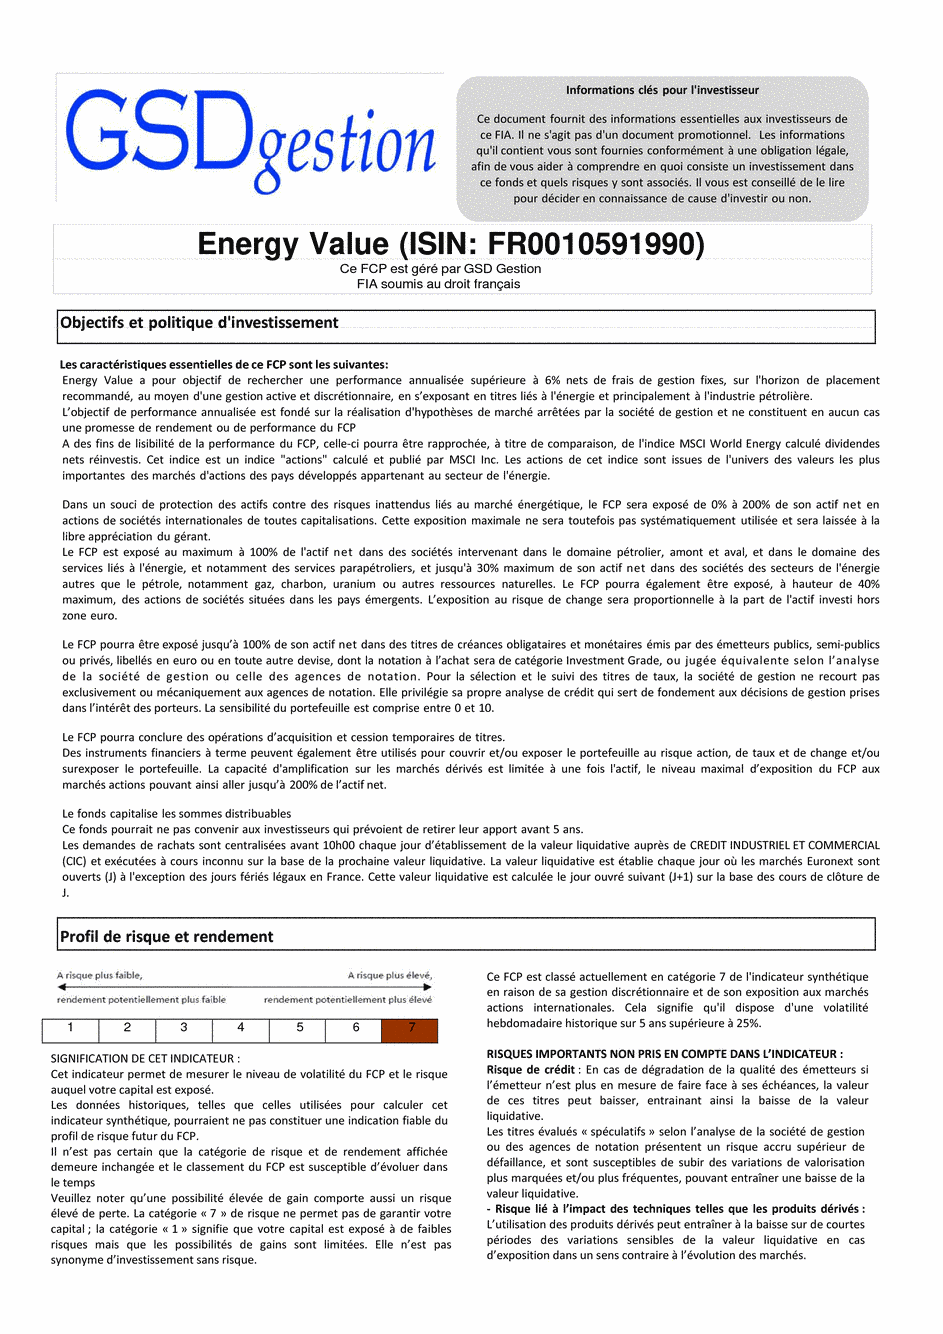 DICI-Prospectus Complet Energy Value - 21/11/2017 - undefined